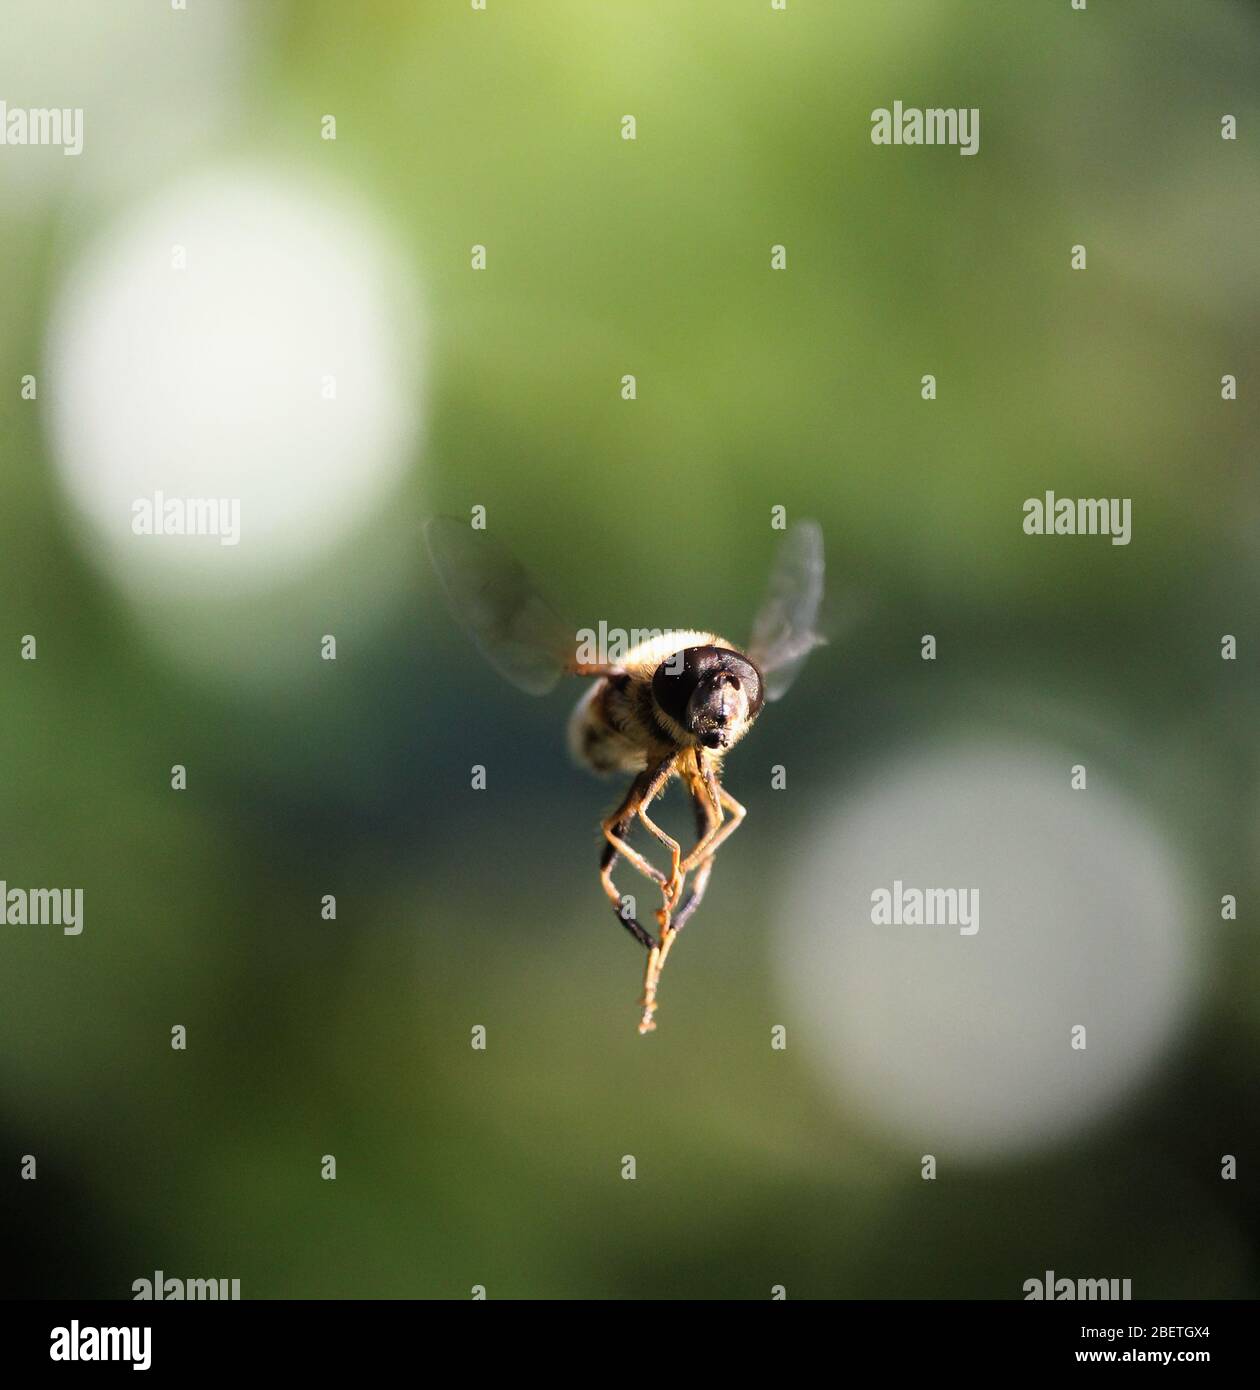 Hoverfly up close, hovering Stock Photo